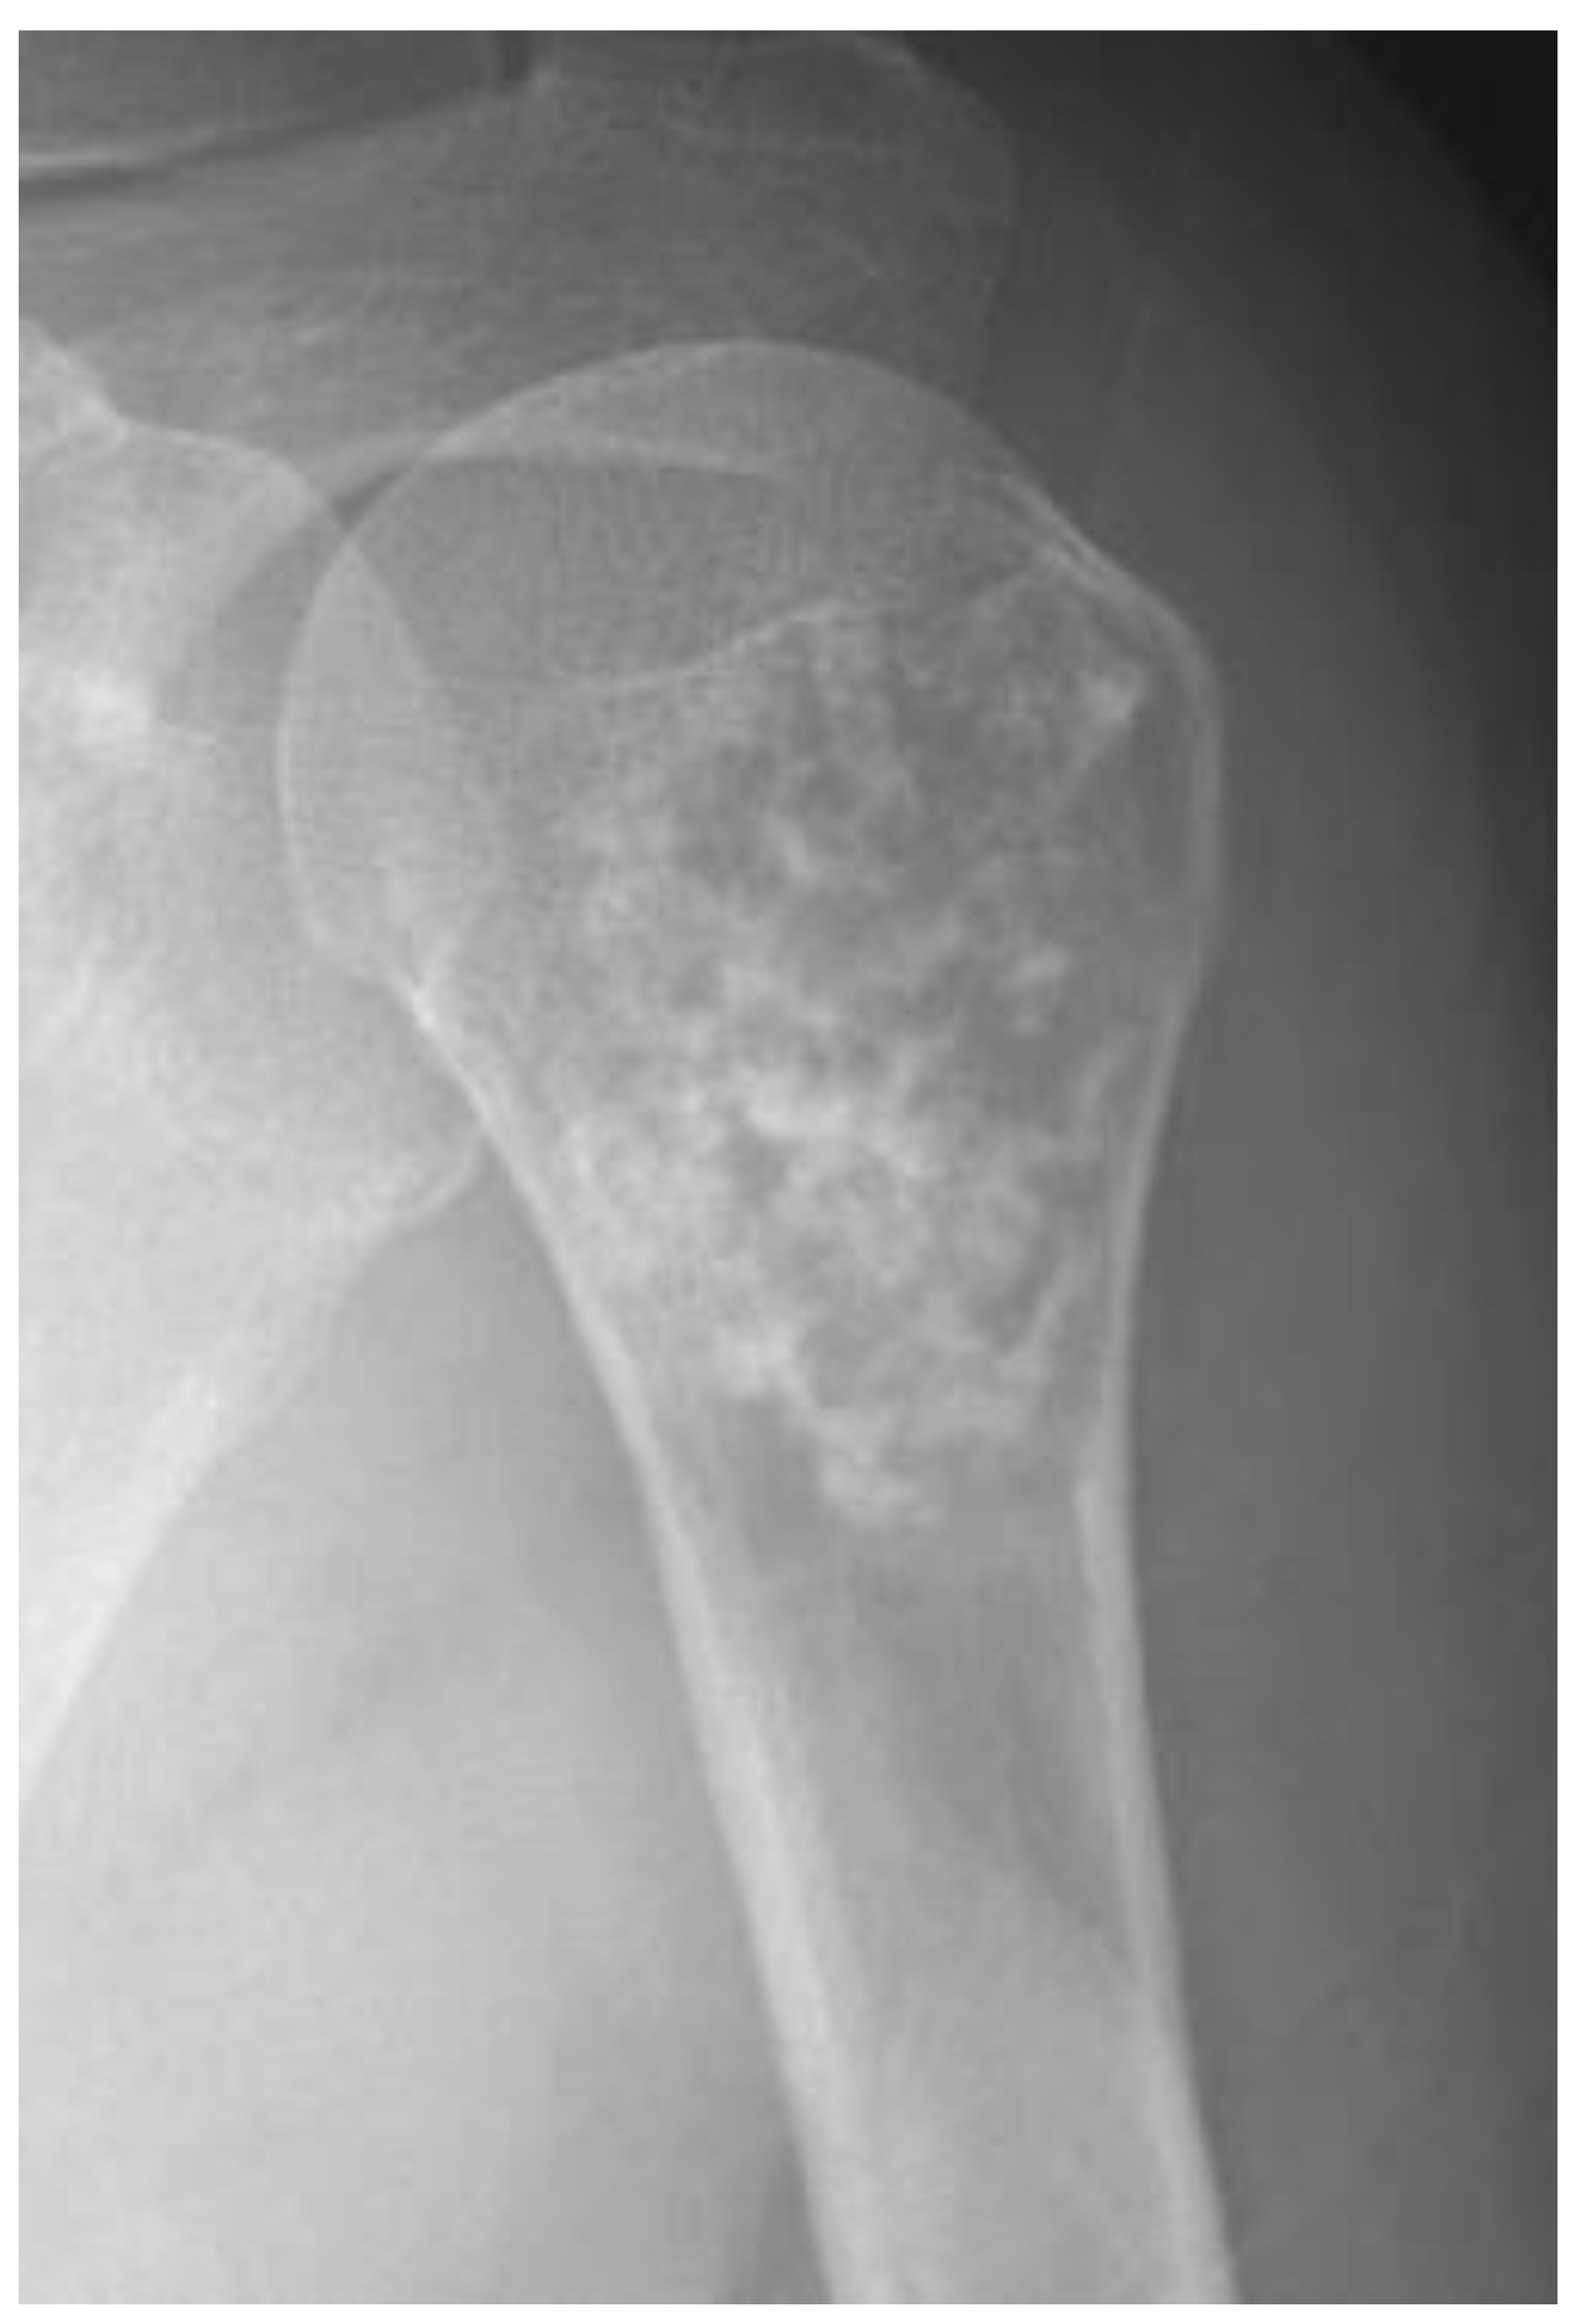 chondroma in knee x ray